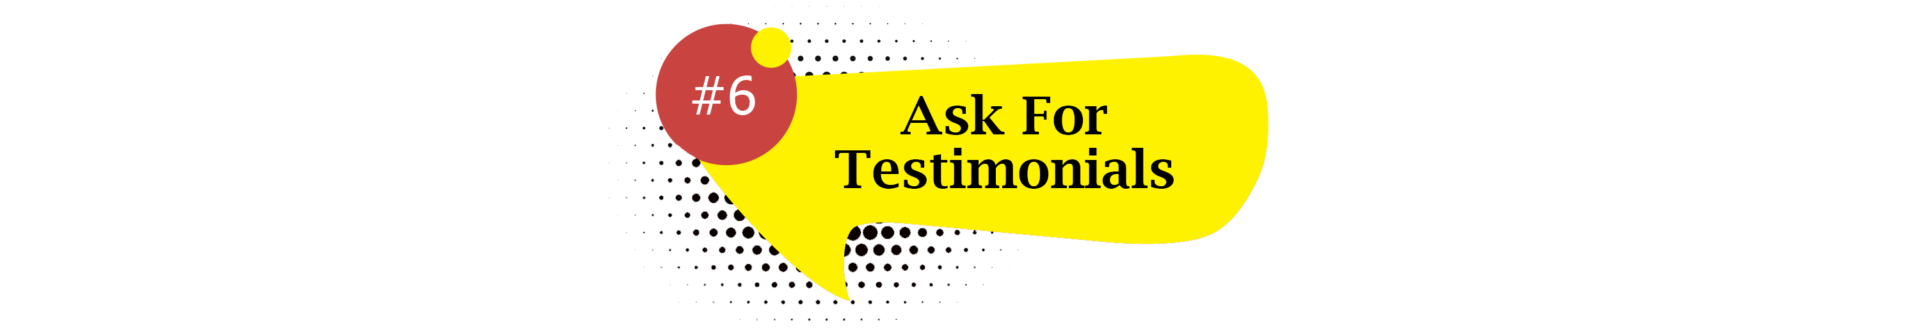 Ask for Testimonials